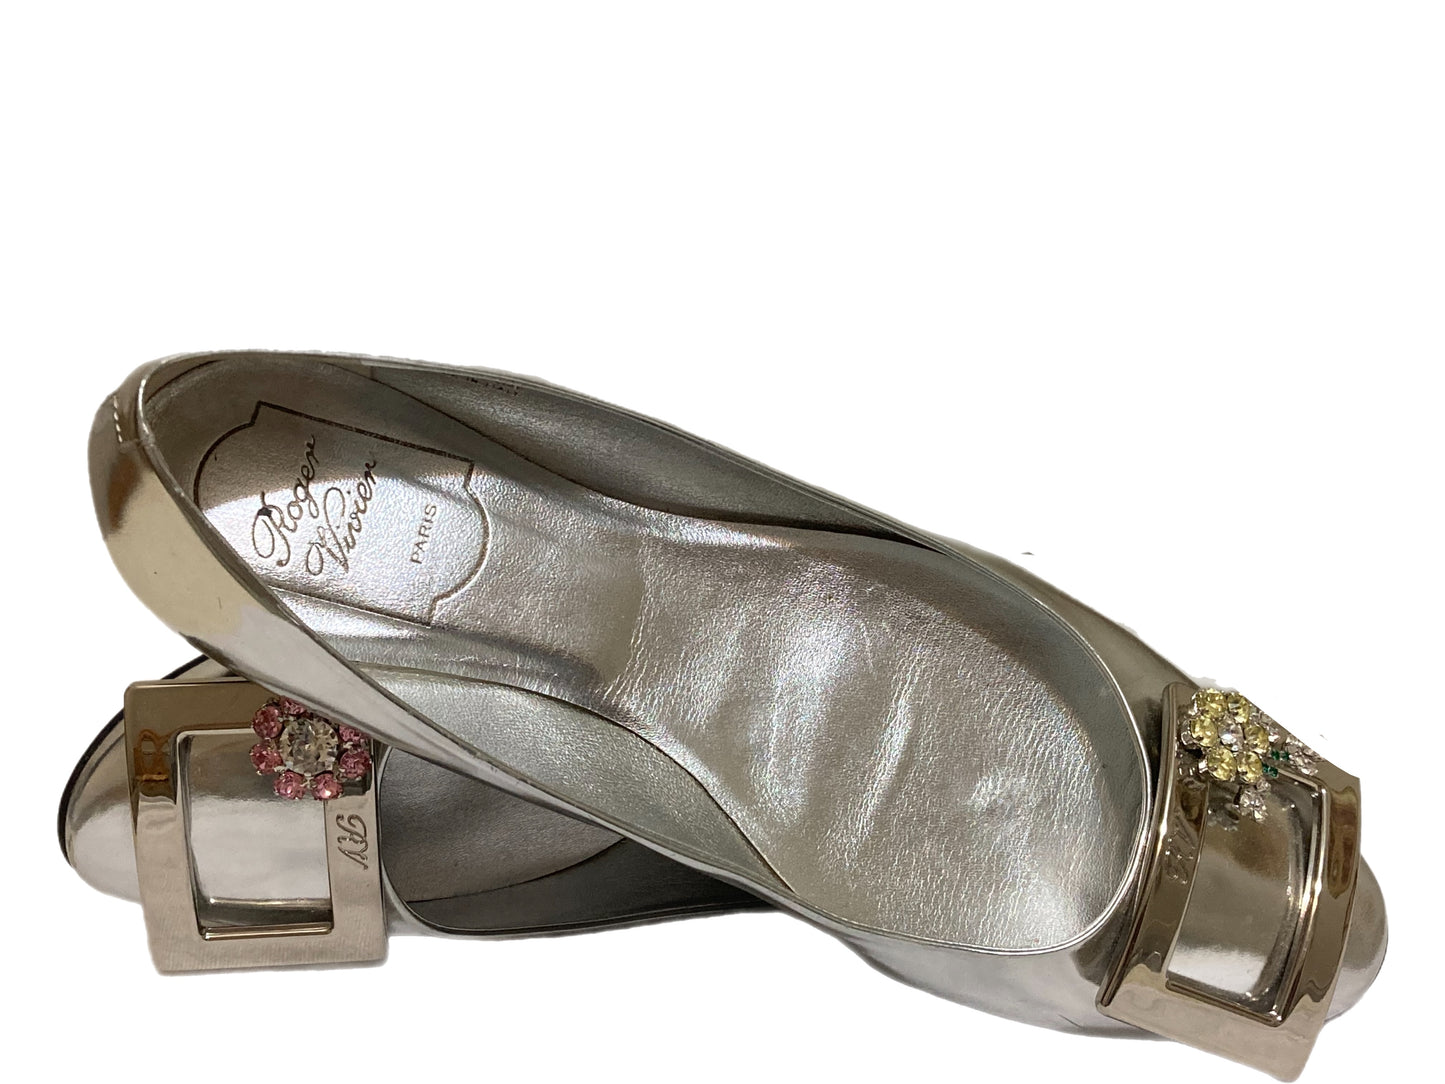 ROGER VIVIER Leather Metallic Flats Silver Size 39